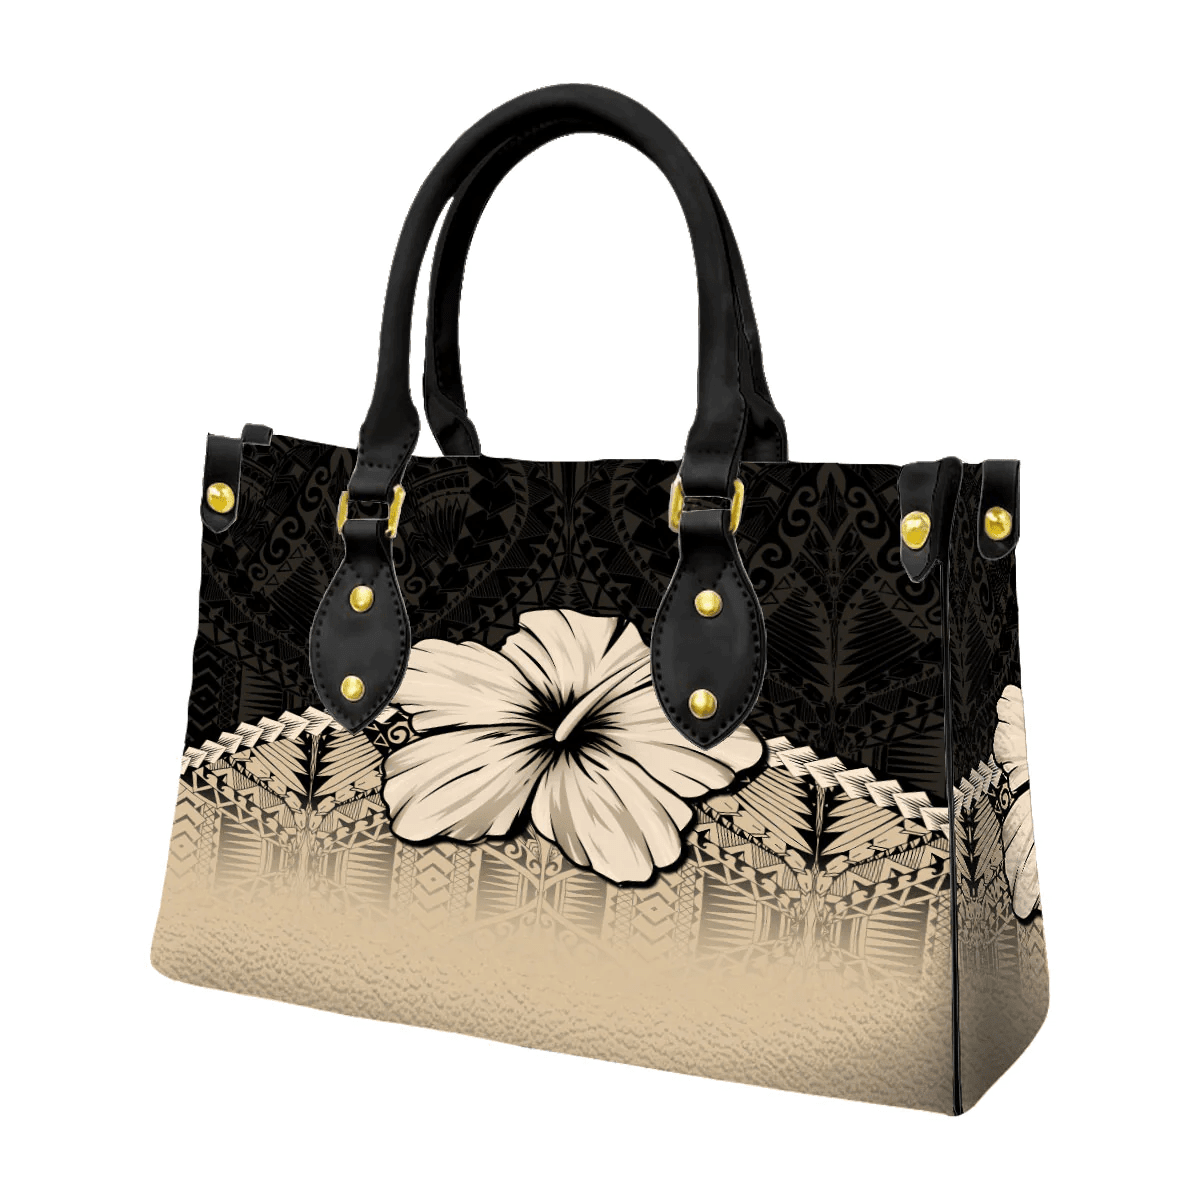 Alohawaii Square Tote Bag - Hibiscus Flower Gold A31